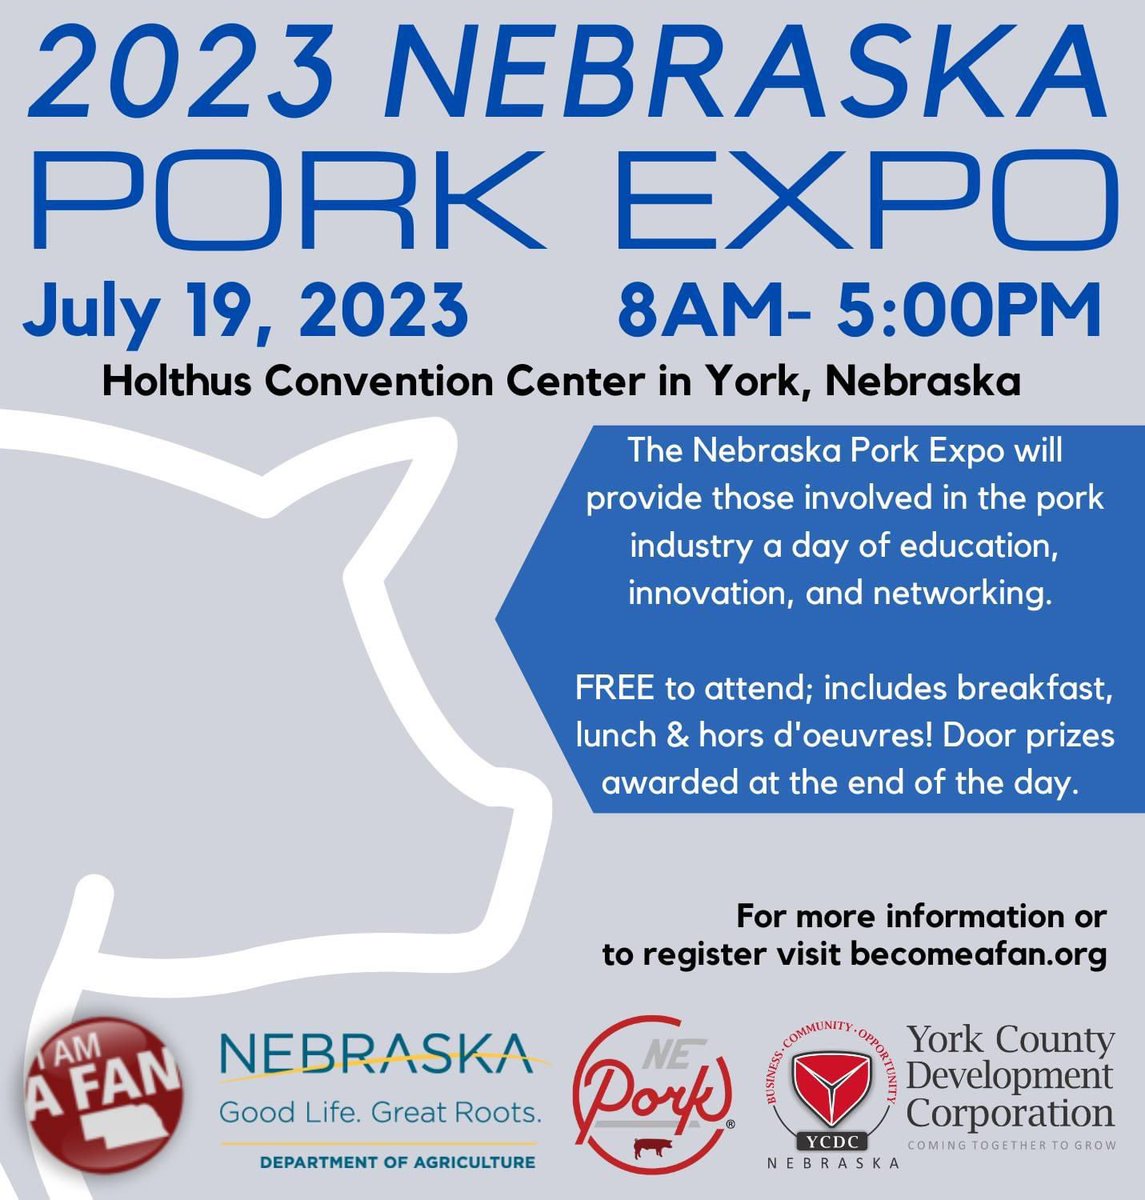 If you're involved in the pork industry you don't want to miss out on this event! 

The full agenda and registration details can be found here ➡️ becomeafan.org/pork-expo/  #NePork #Pork #NePorkExpo #PorkExpo #Agshow #AgEducation #AFAN #NDA